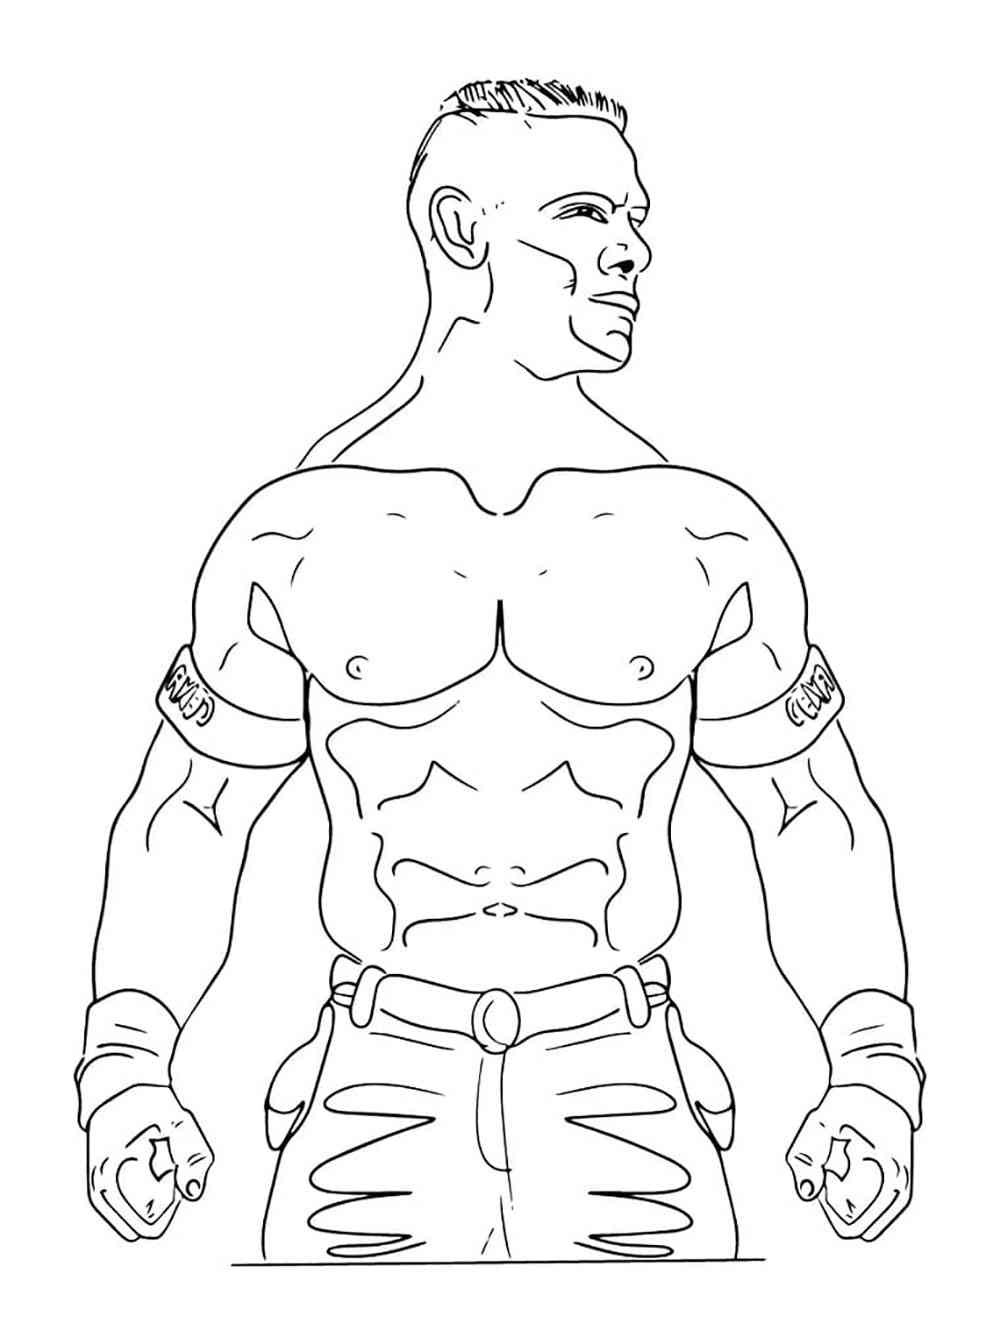 John Cena coloring pages